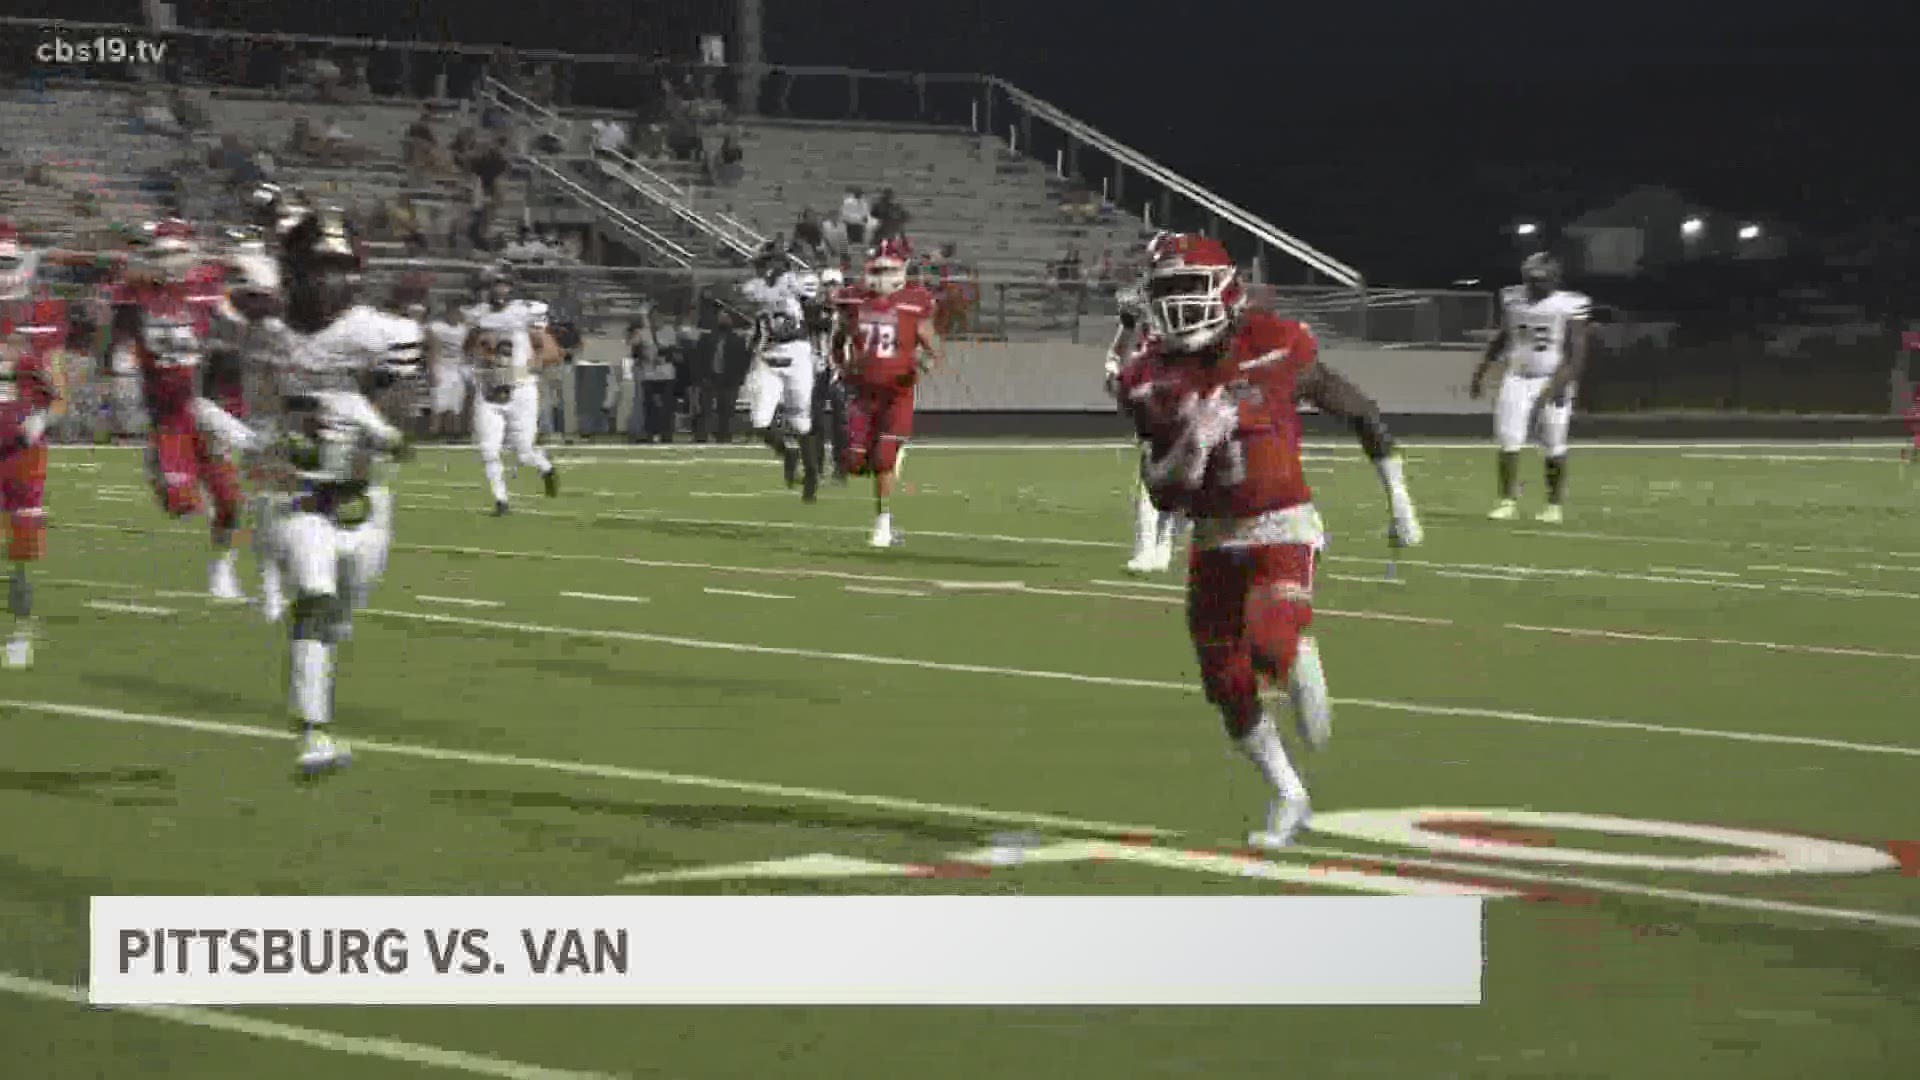 The Pittsburg Pirates traveled to Van to take on the Vandals in Week 4 of the Texas high school football season.